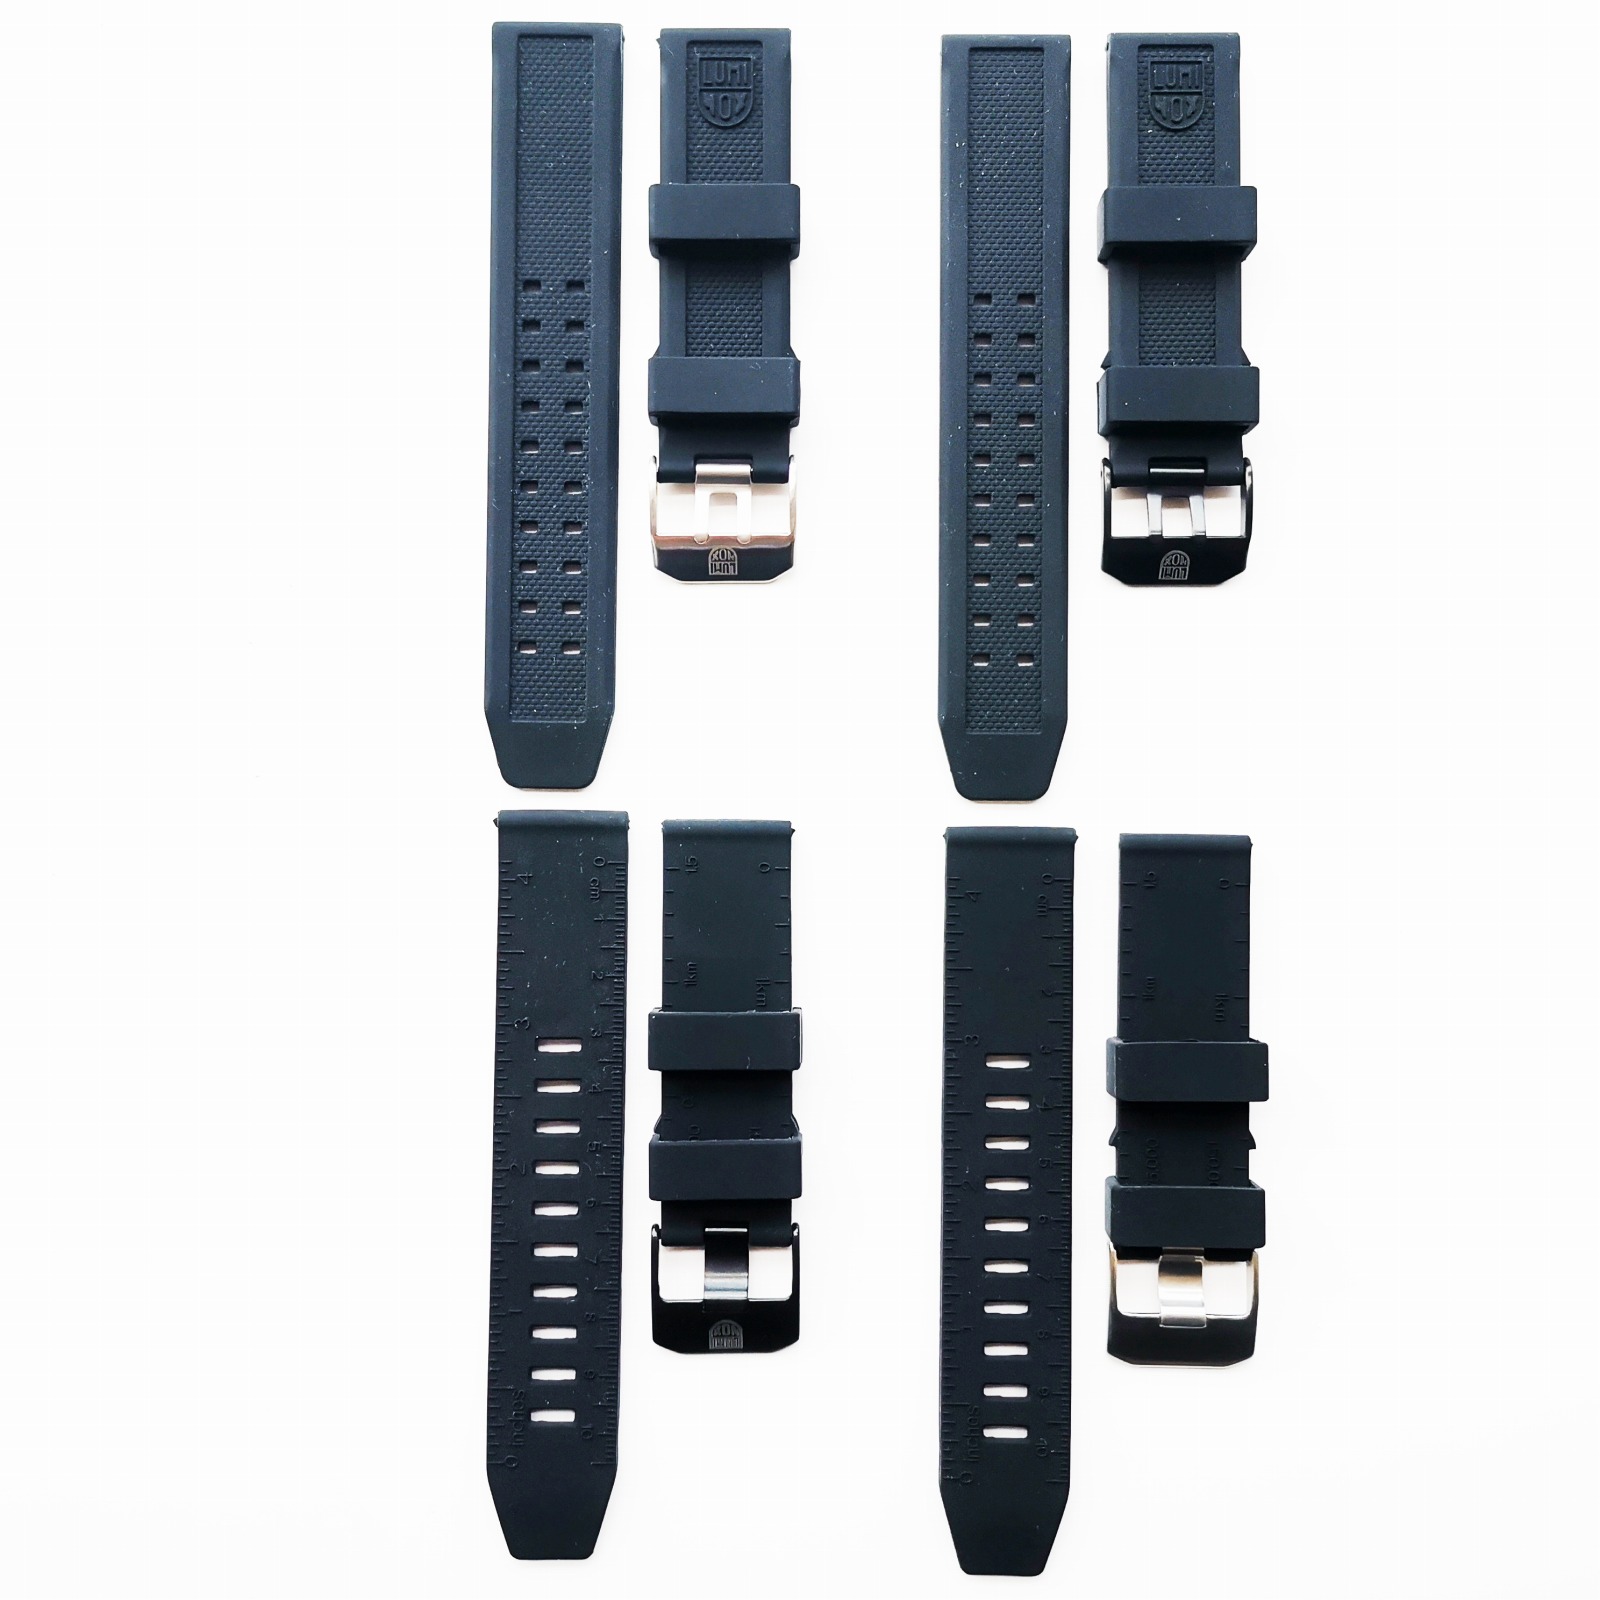 Universal Watchstraps Silicone Watch Strap Dây đeo cao su 23mm Dây đeo đồng hồ Band 3051 3150 Compass Series Watchbands